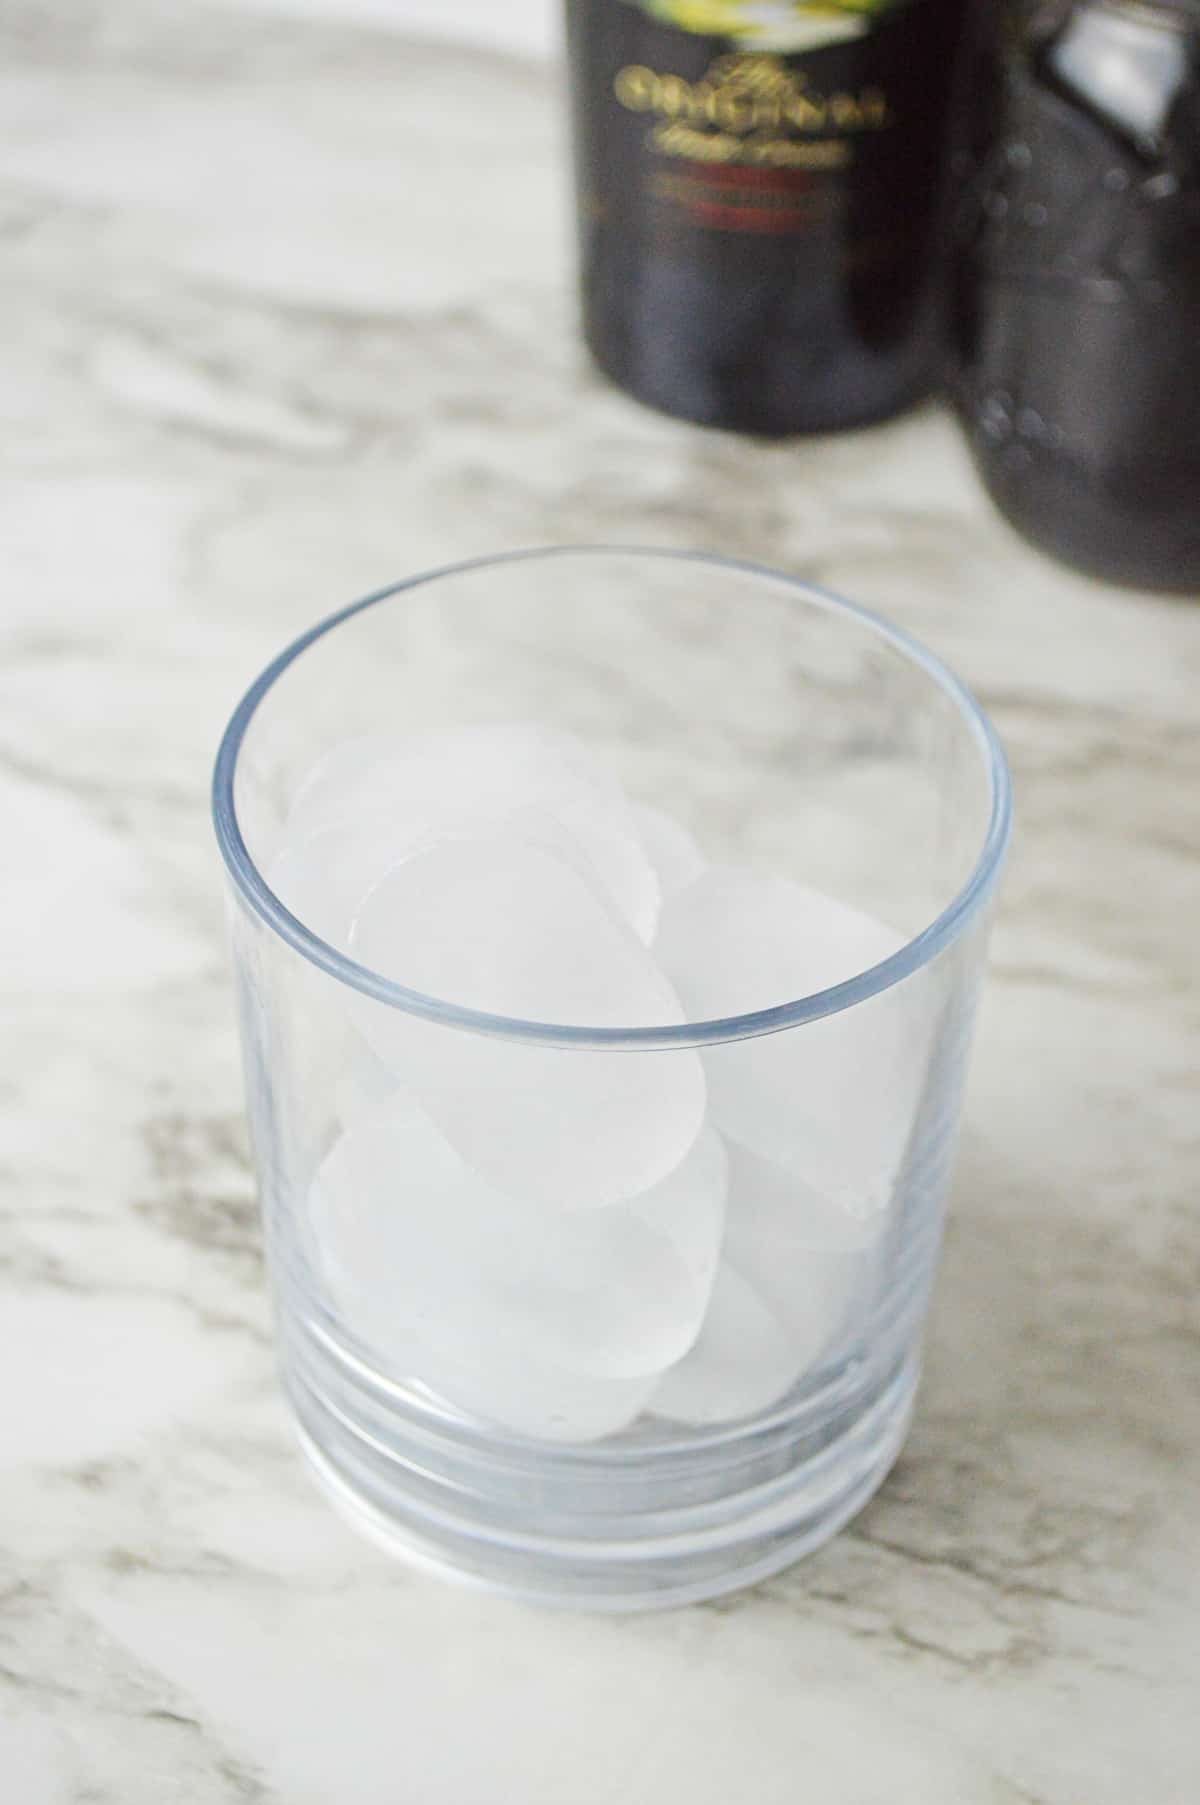 Ice in a glass.